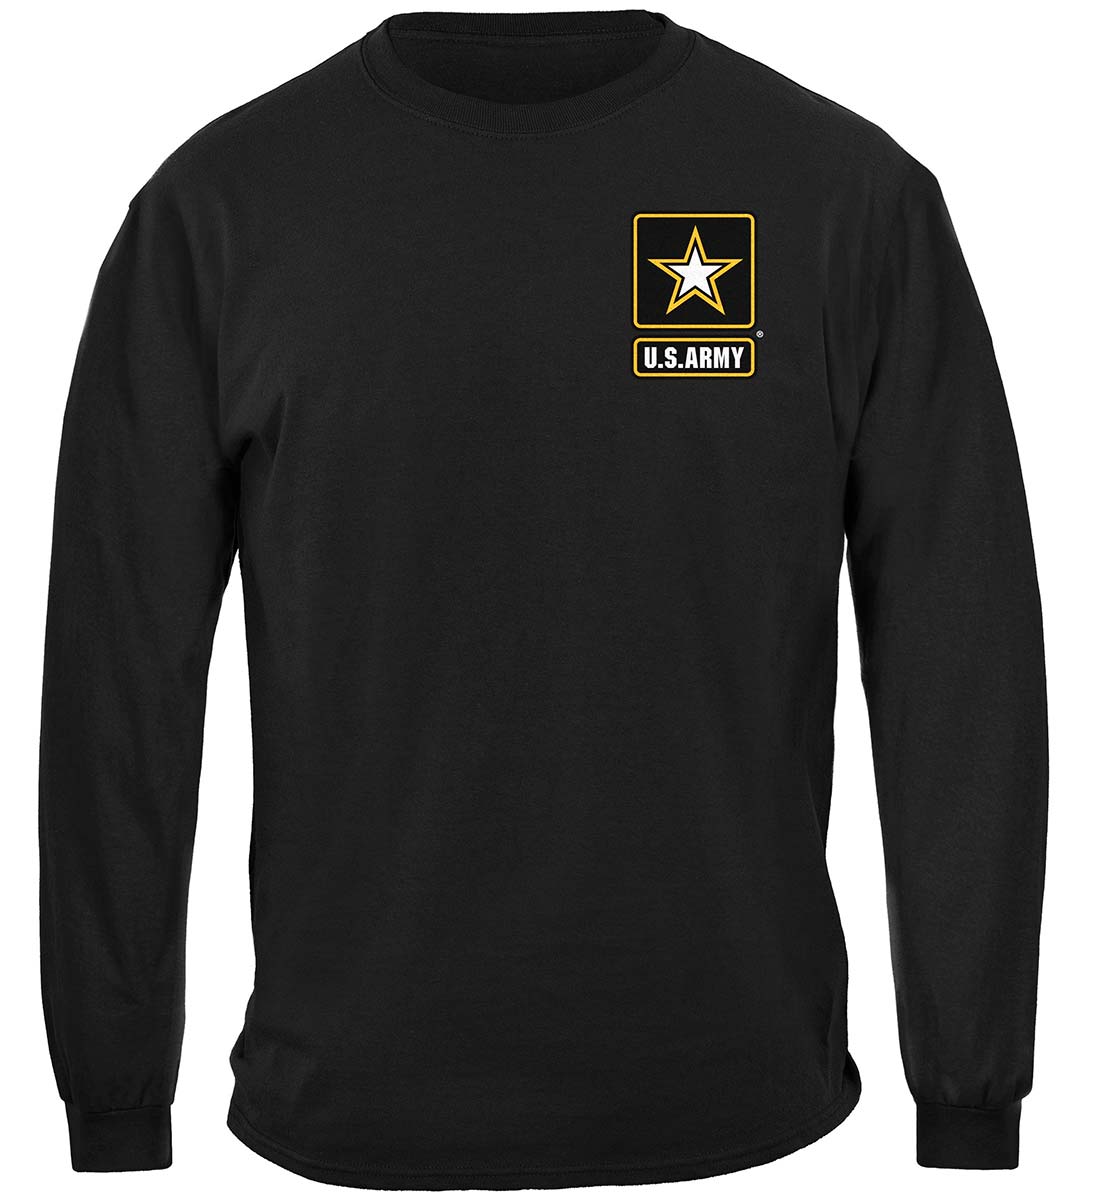 Army Strong Helicopter Solider Premium Hooded Sweat Shirt